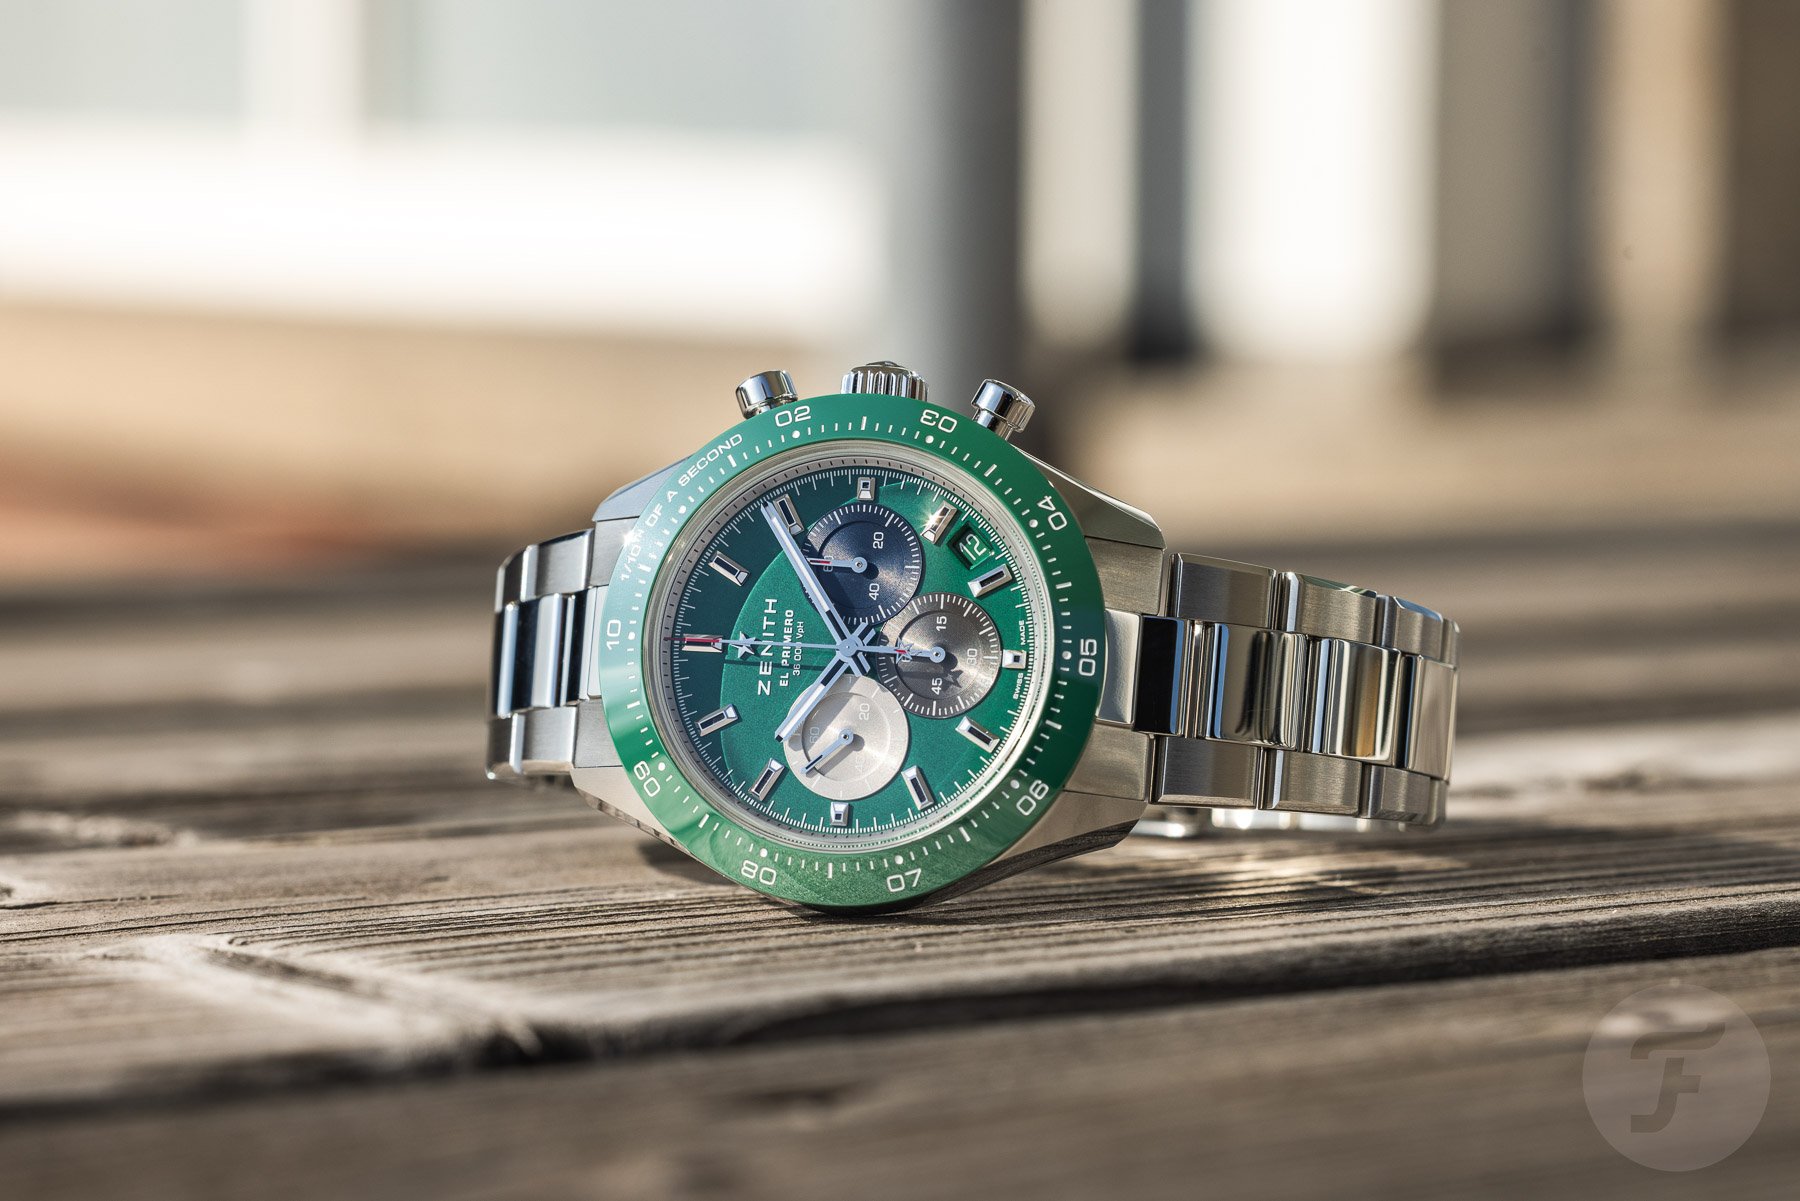 I Got My Hands On The Very Green Zenith Chronomaster Sport Watch This Monday Morning